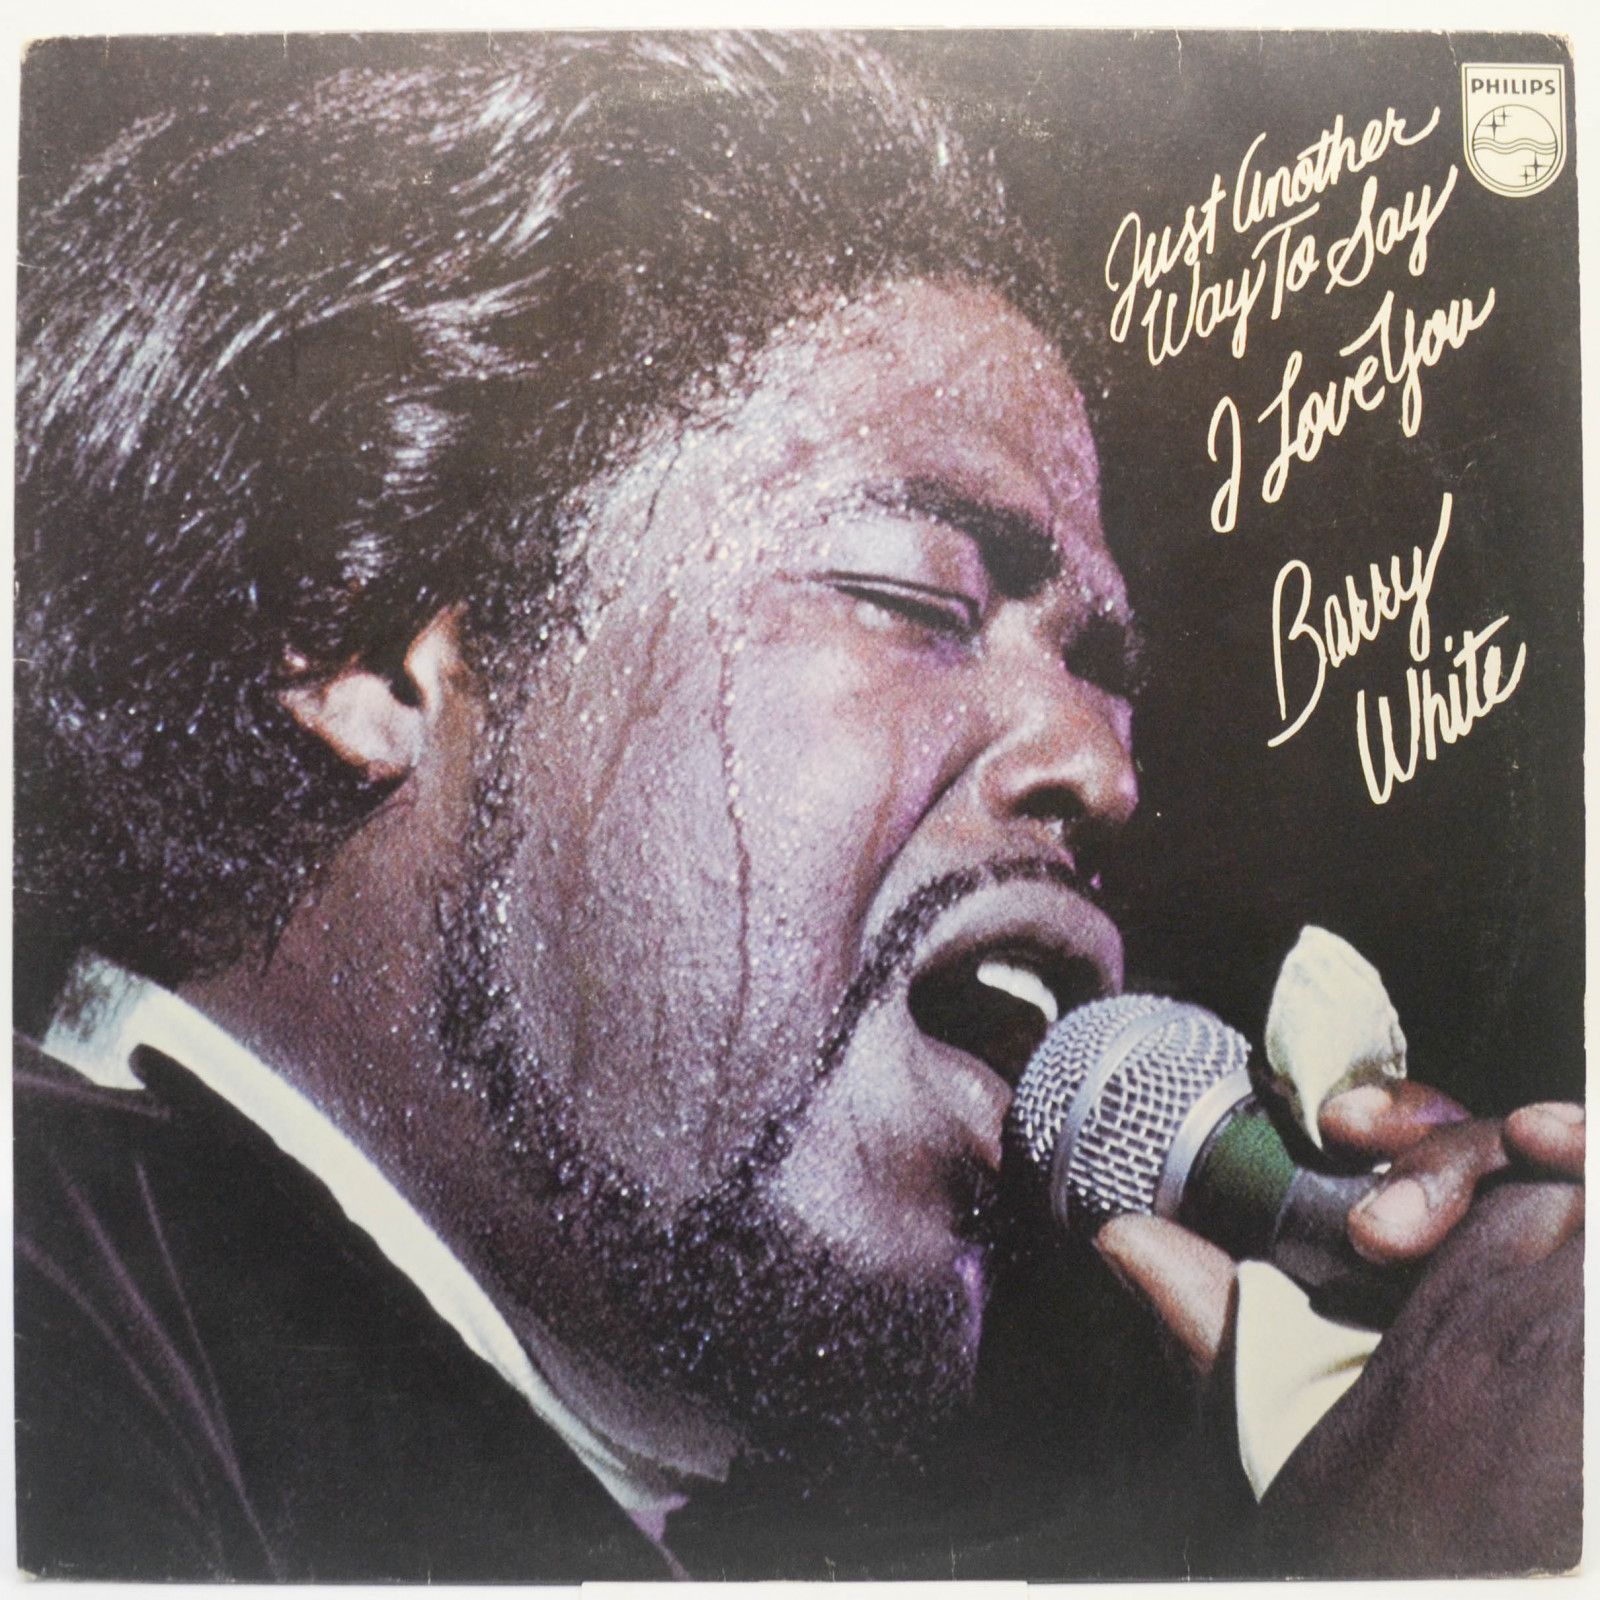 Barry White — Just Another Way To Say I Love You, 1975